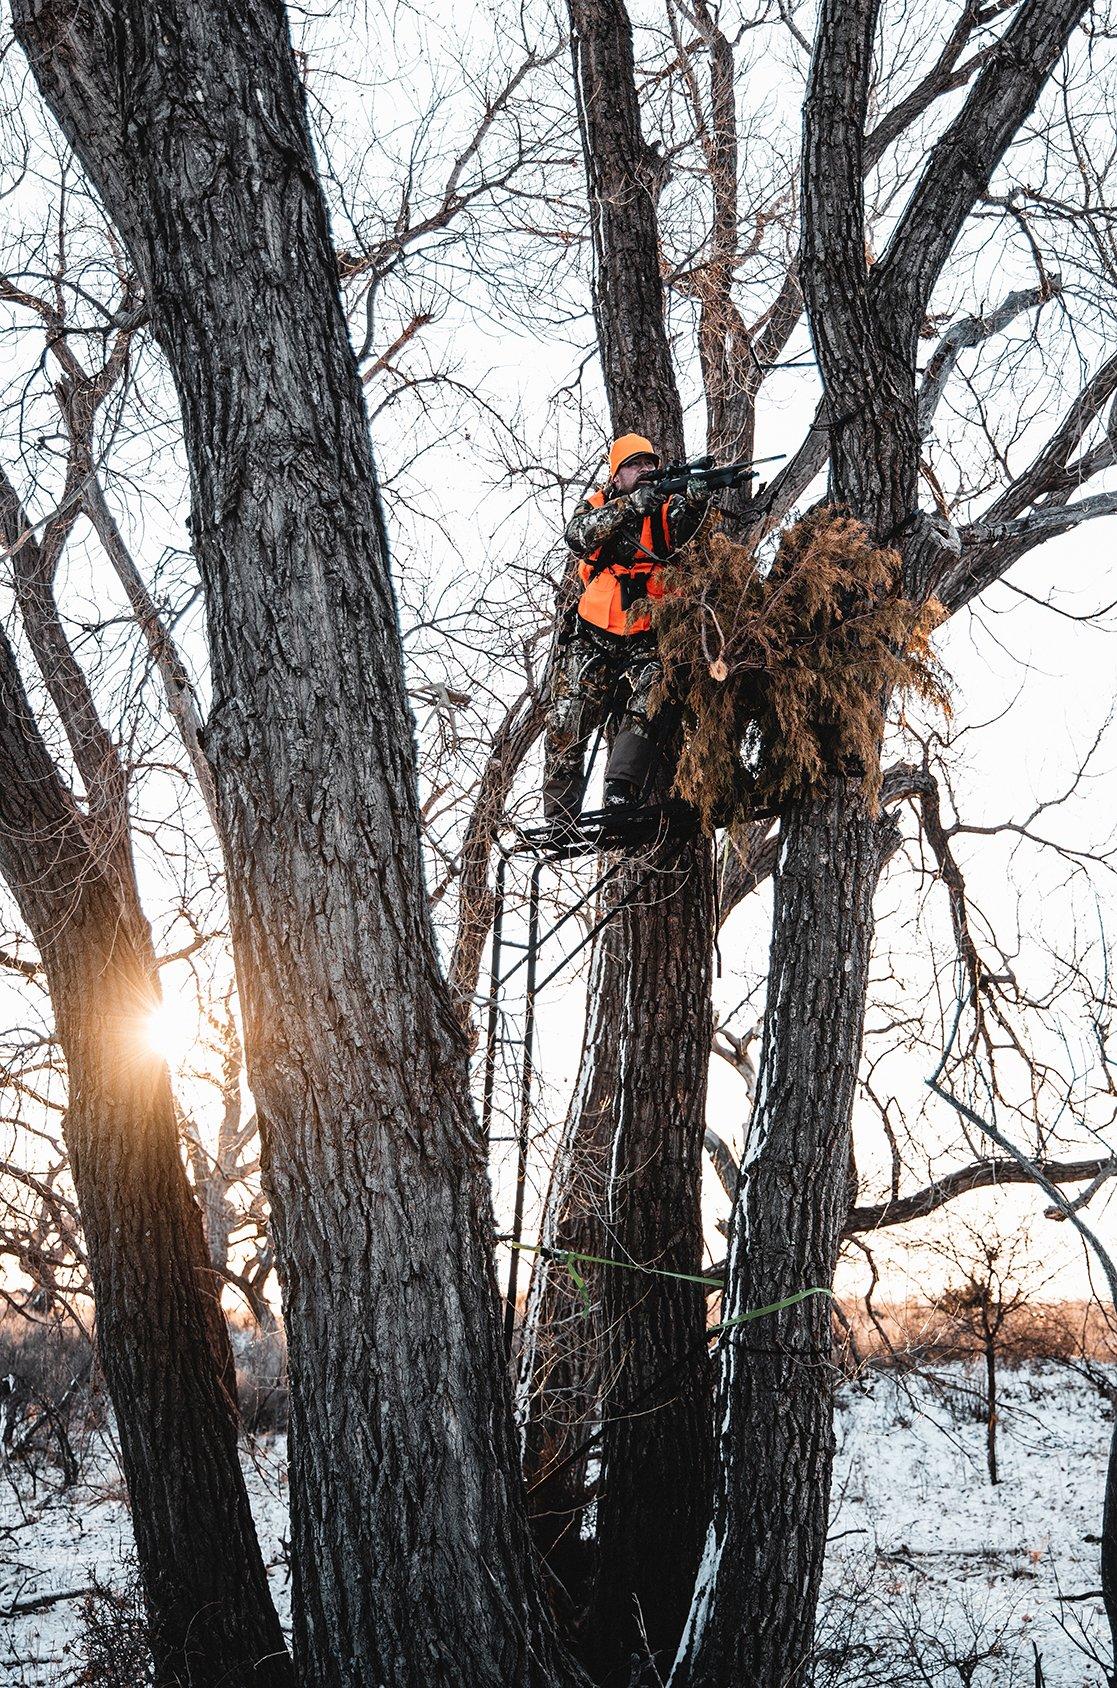 Stay on guard. It can happen at any moment, regardless of the day. Image by Realtree Media